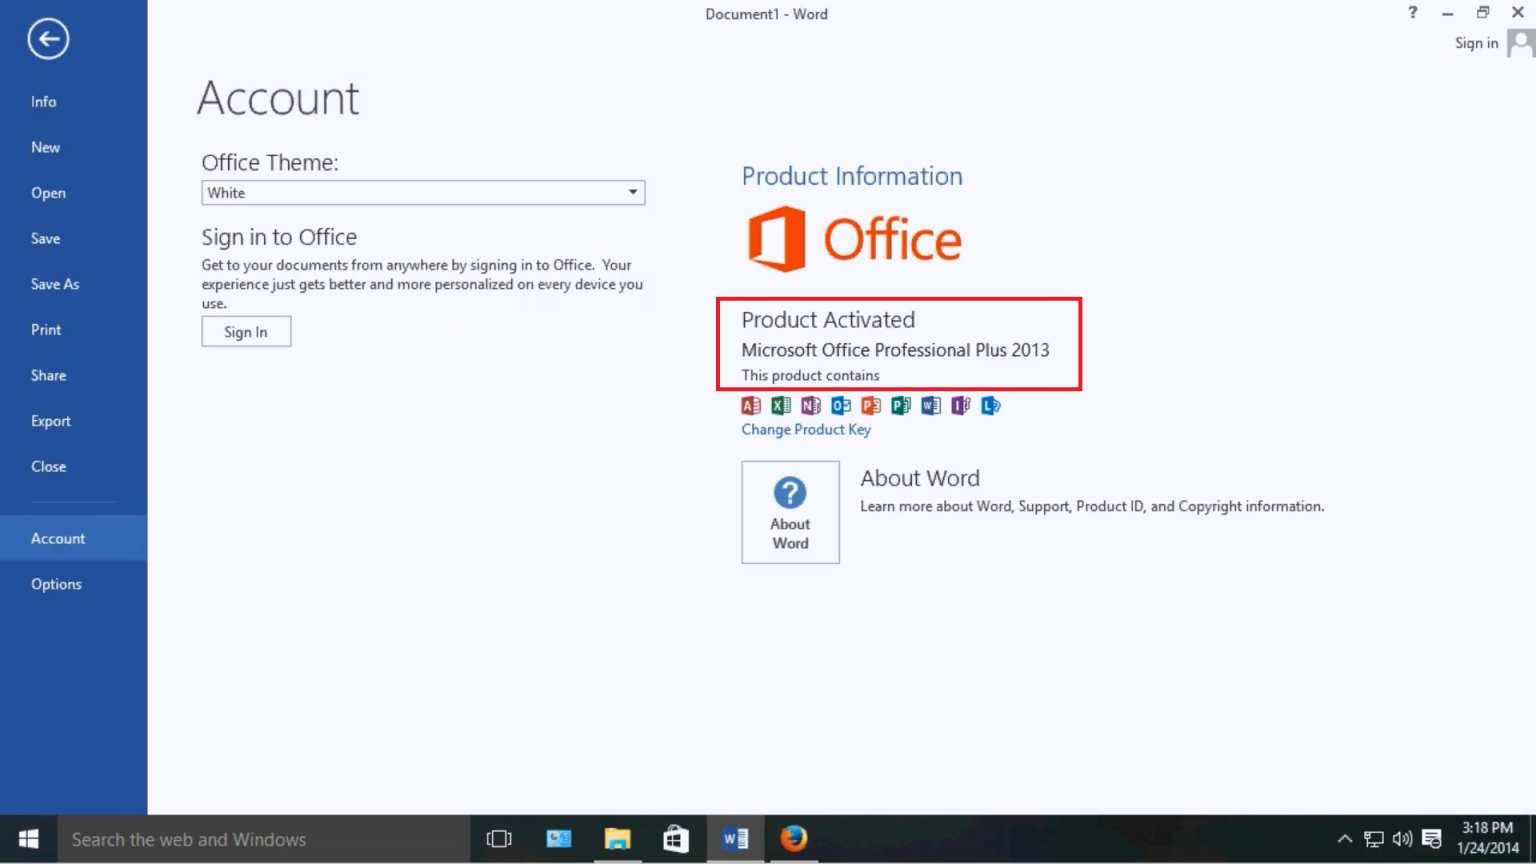 office 2013 free download with crack full version 64 bit